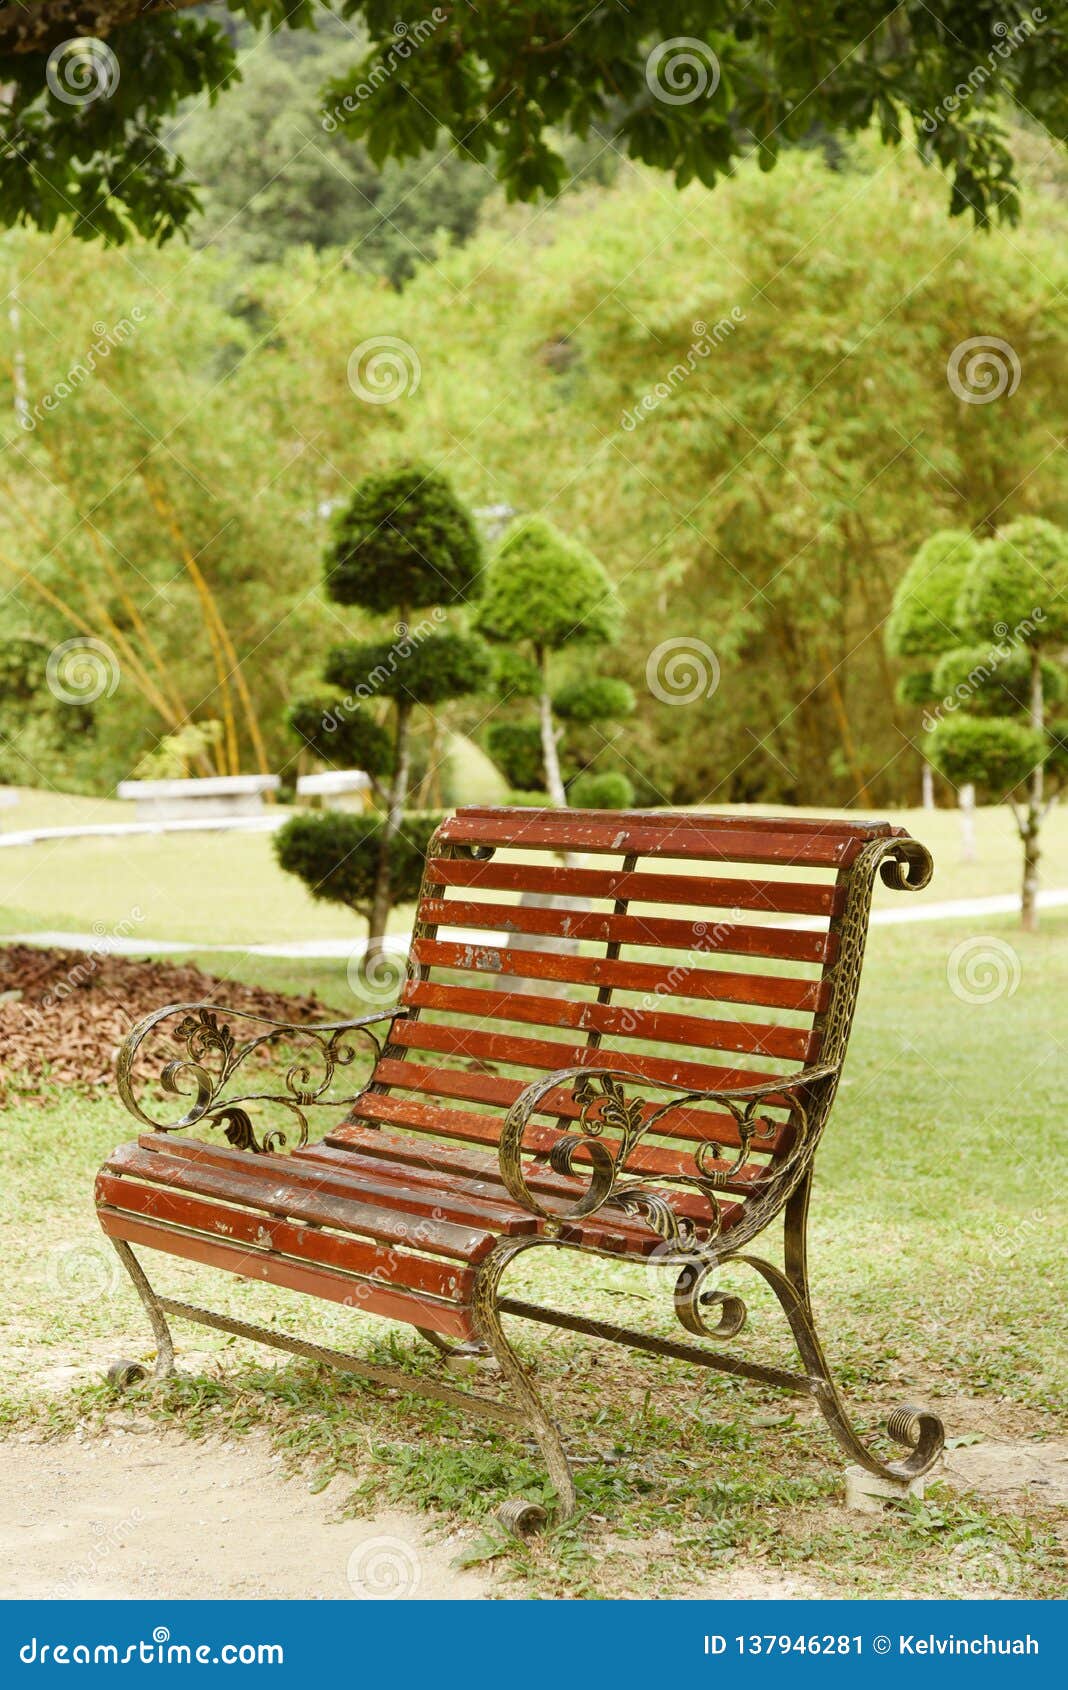 Garden stock image. Image of furniture, vacation, backgrounds - 137946281